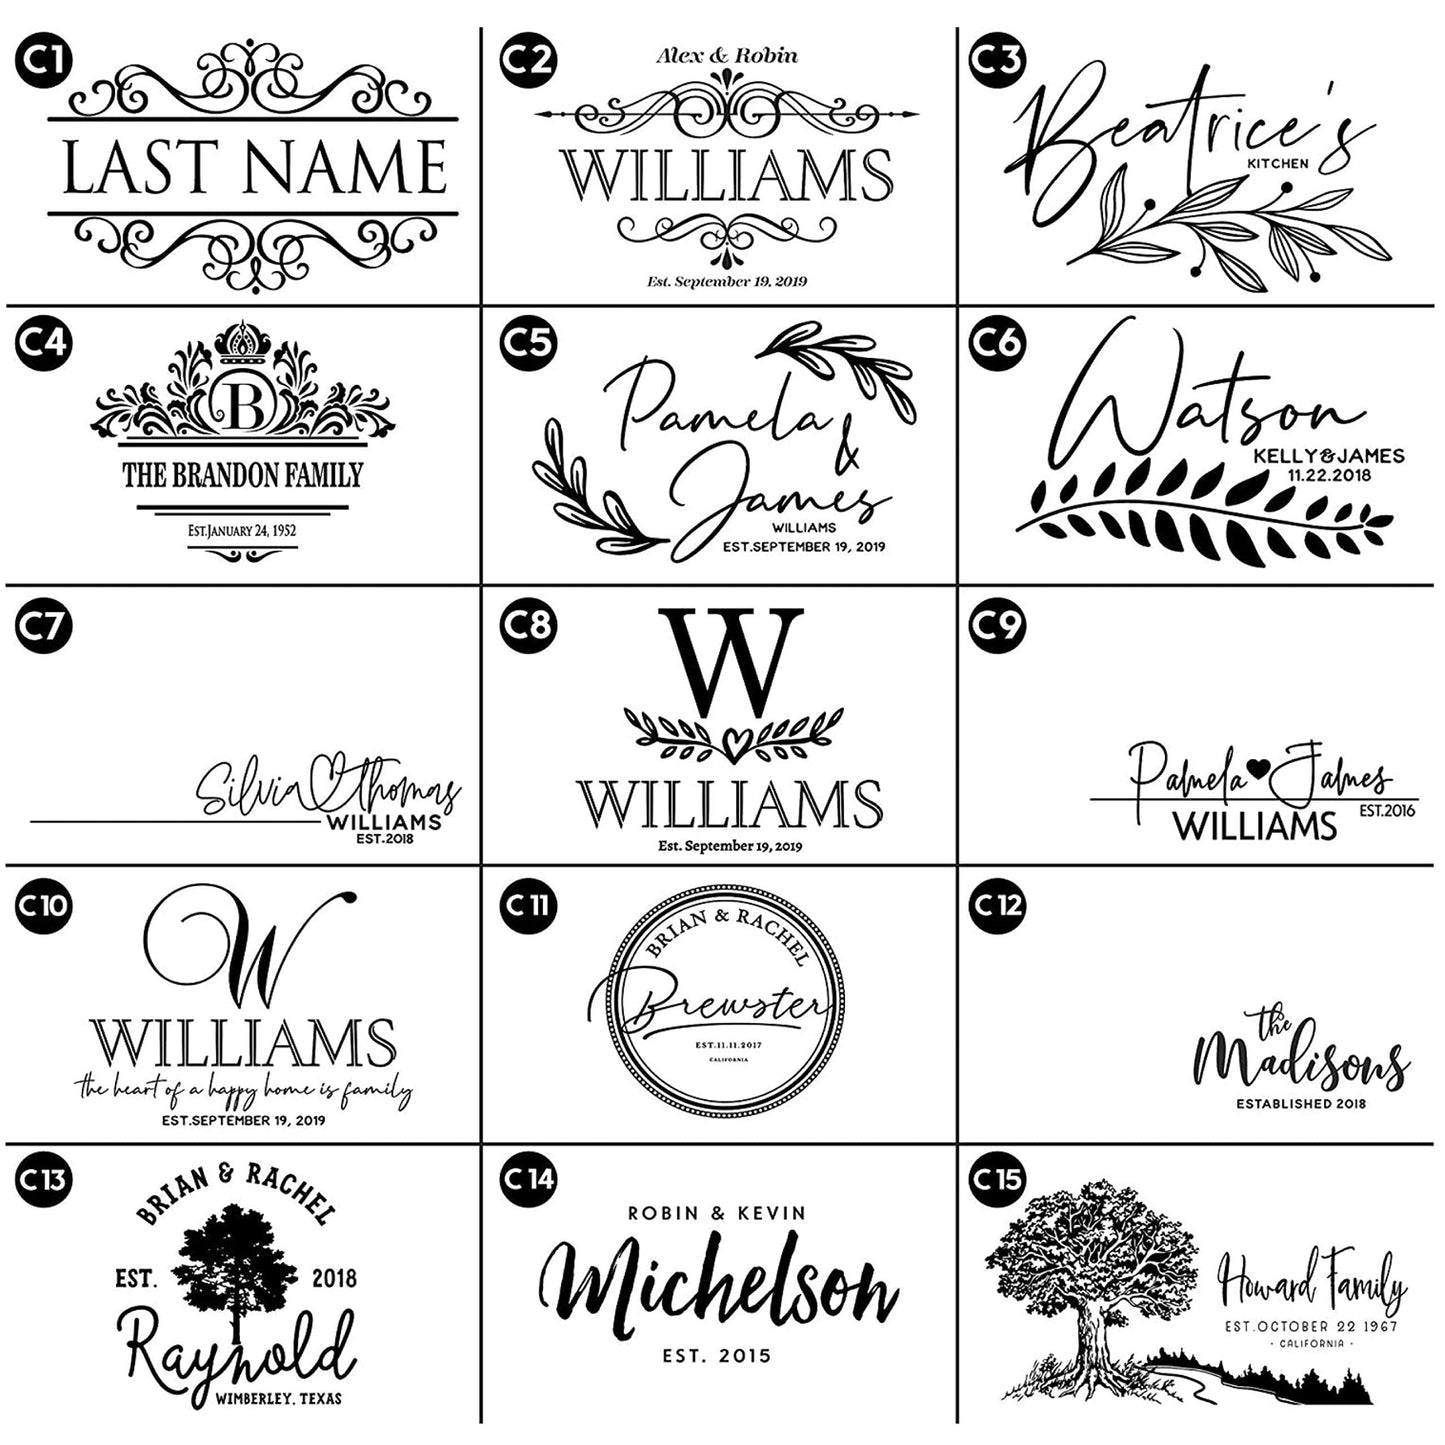 Personalized Cutting Board, 15 Designs - Gifts for Couples, Housewarming Gifts, Wedding Gifts, Engraved Kitchen Sign - Personalized Gifts for Mom